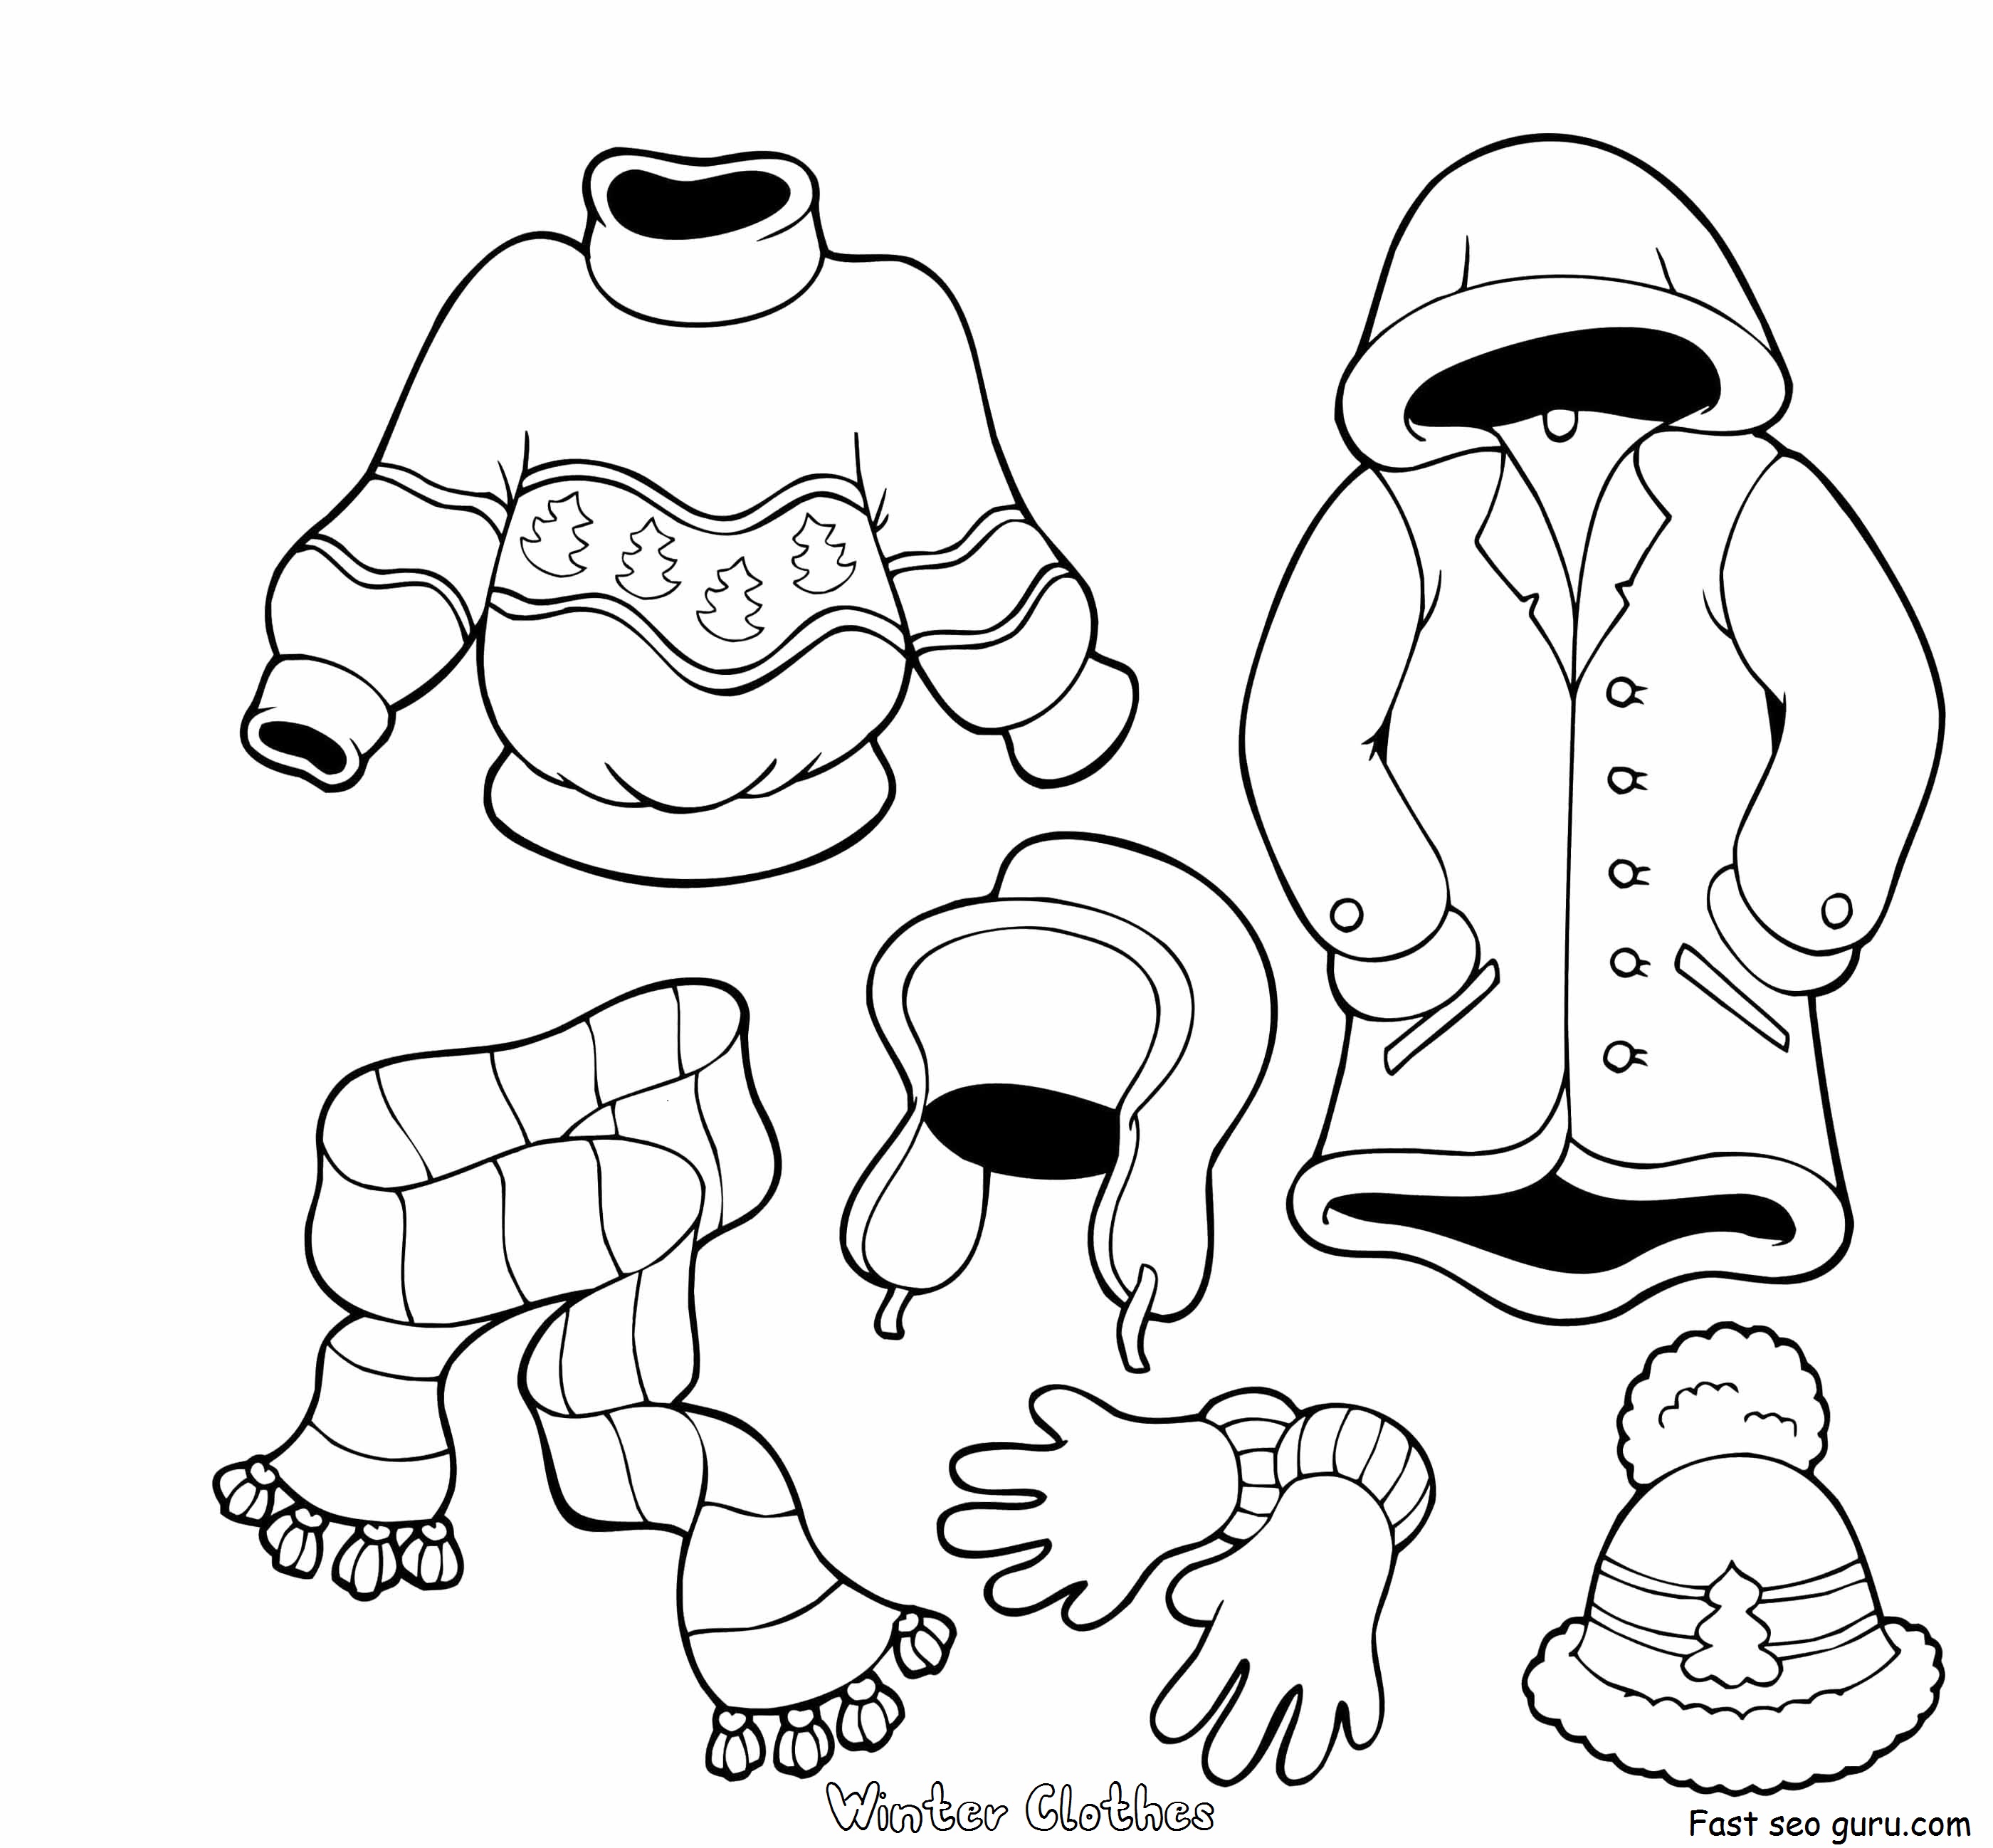 Printable Winter Clothes Coloring Pages